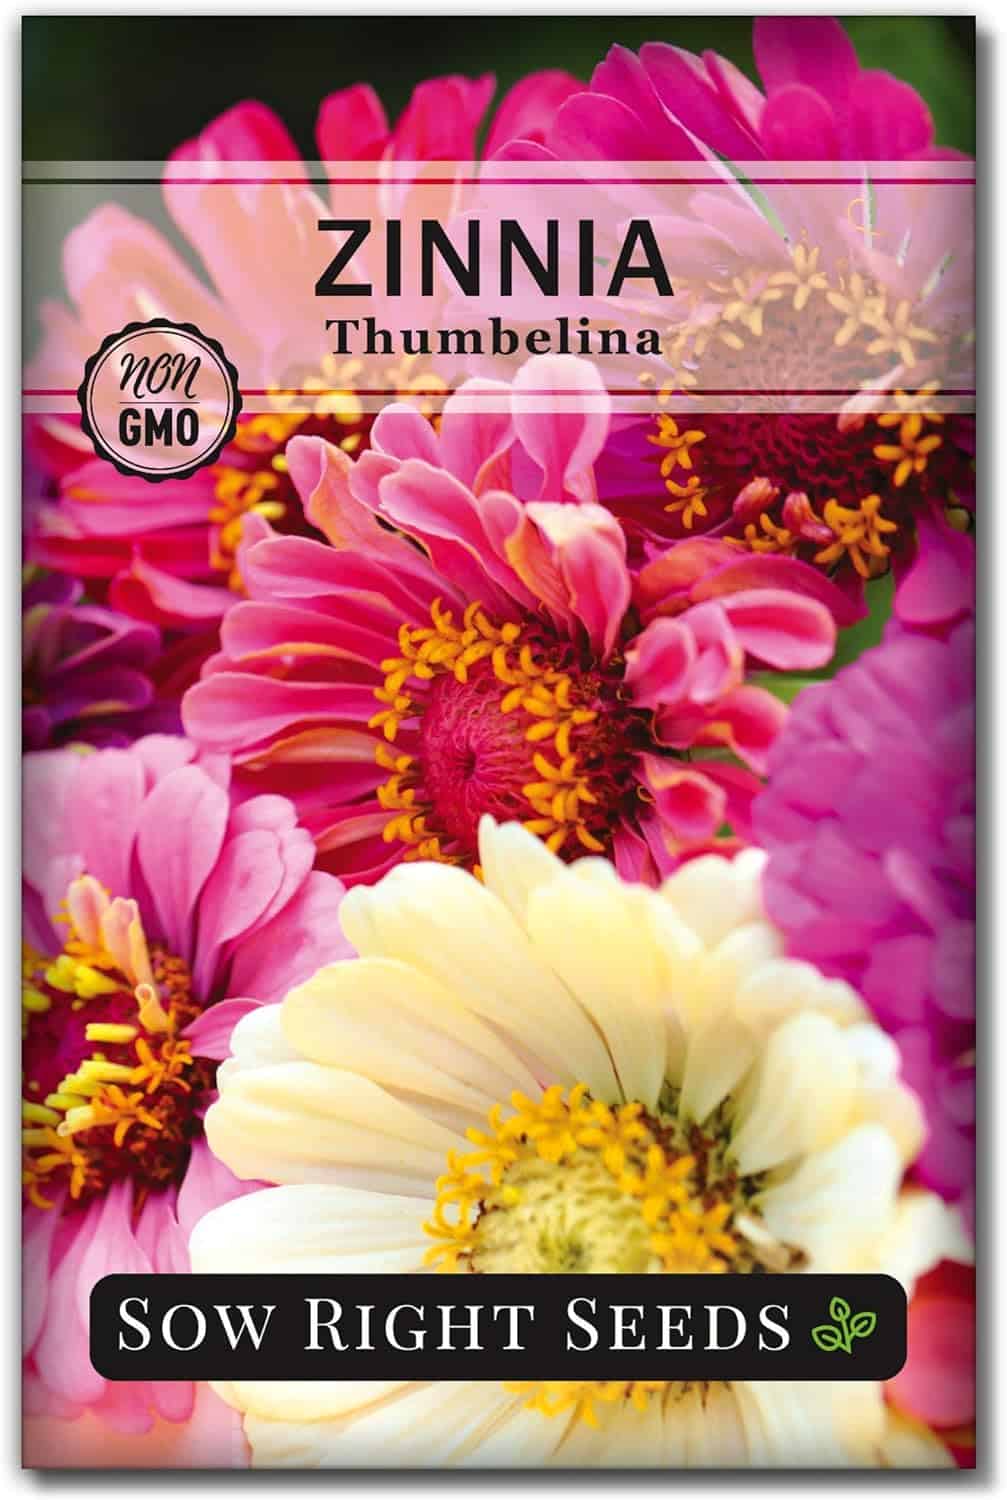 Sow Right Seeds - Thumbelina Zinnia Seeds for Planting - Beautiful to Plant in Your Flower Garden - Non-GMO Heirloom Packet with Instructions - Annual Cut and Come Again for Bouquets